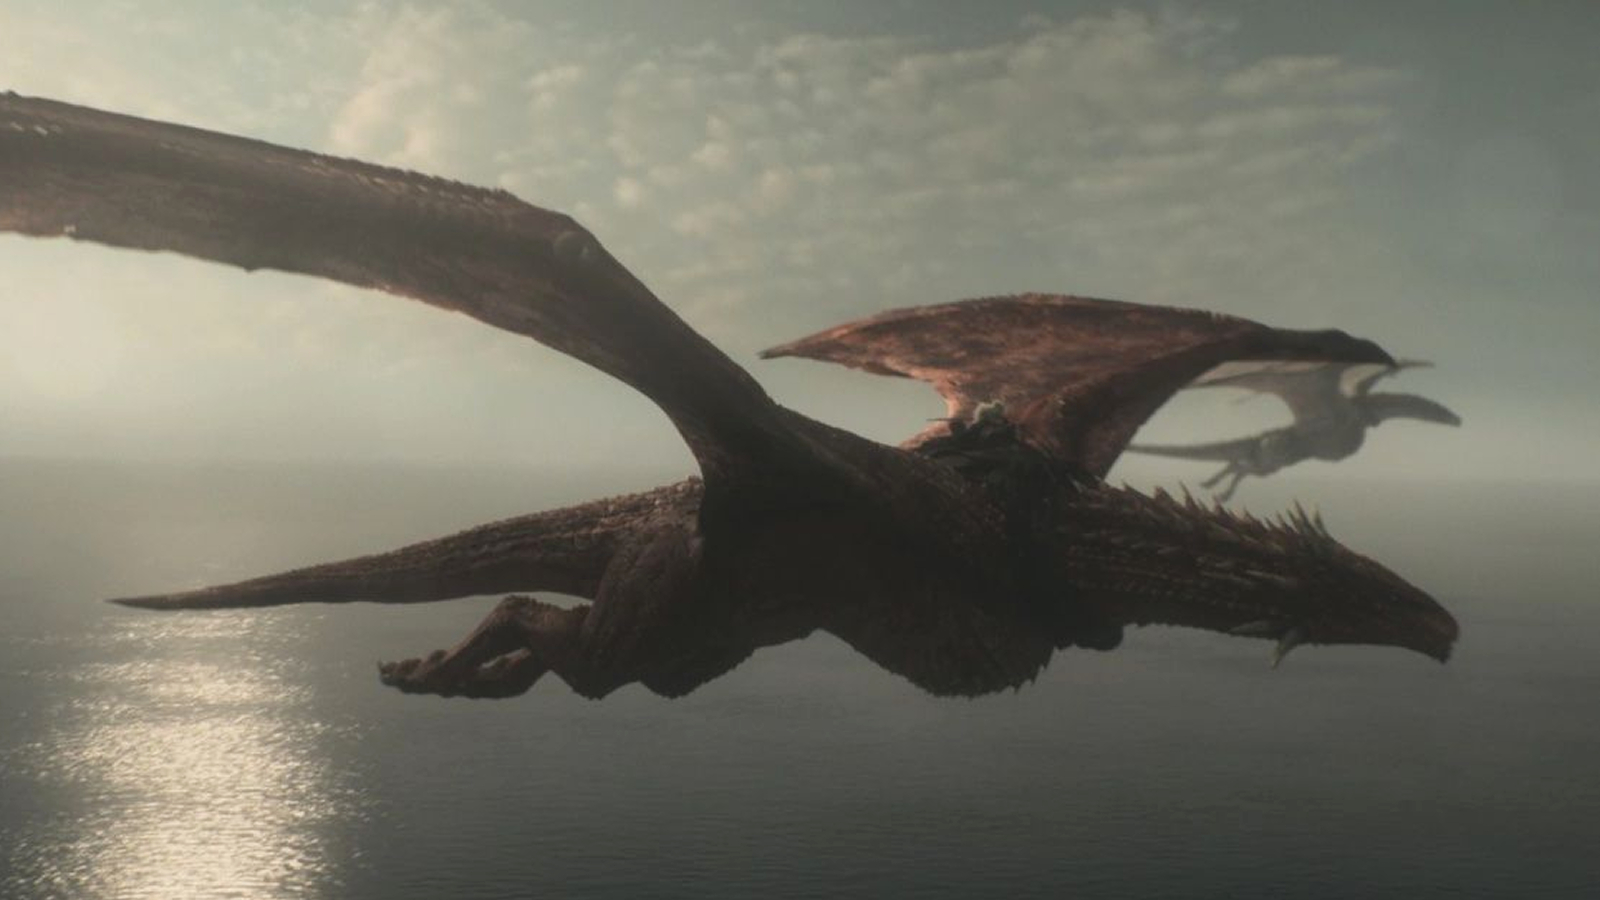 Dragons flying side-by-side in House of the Dragon Season 2